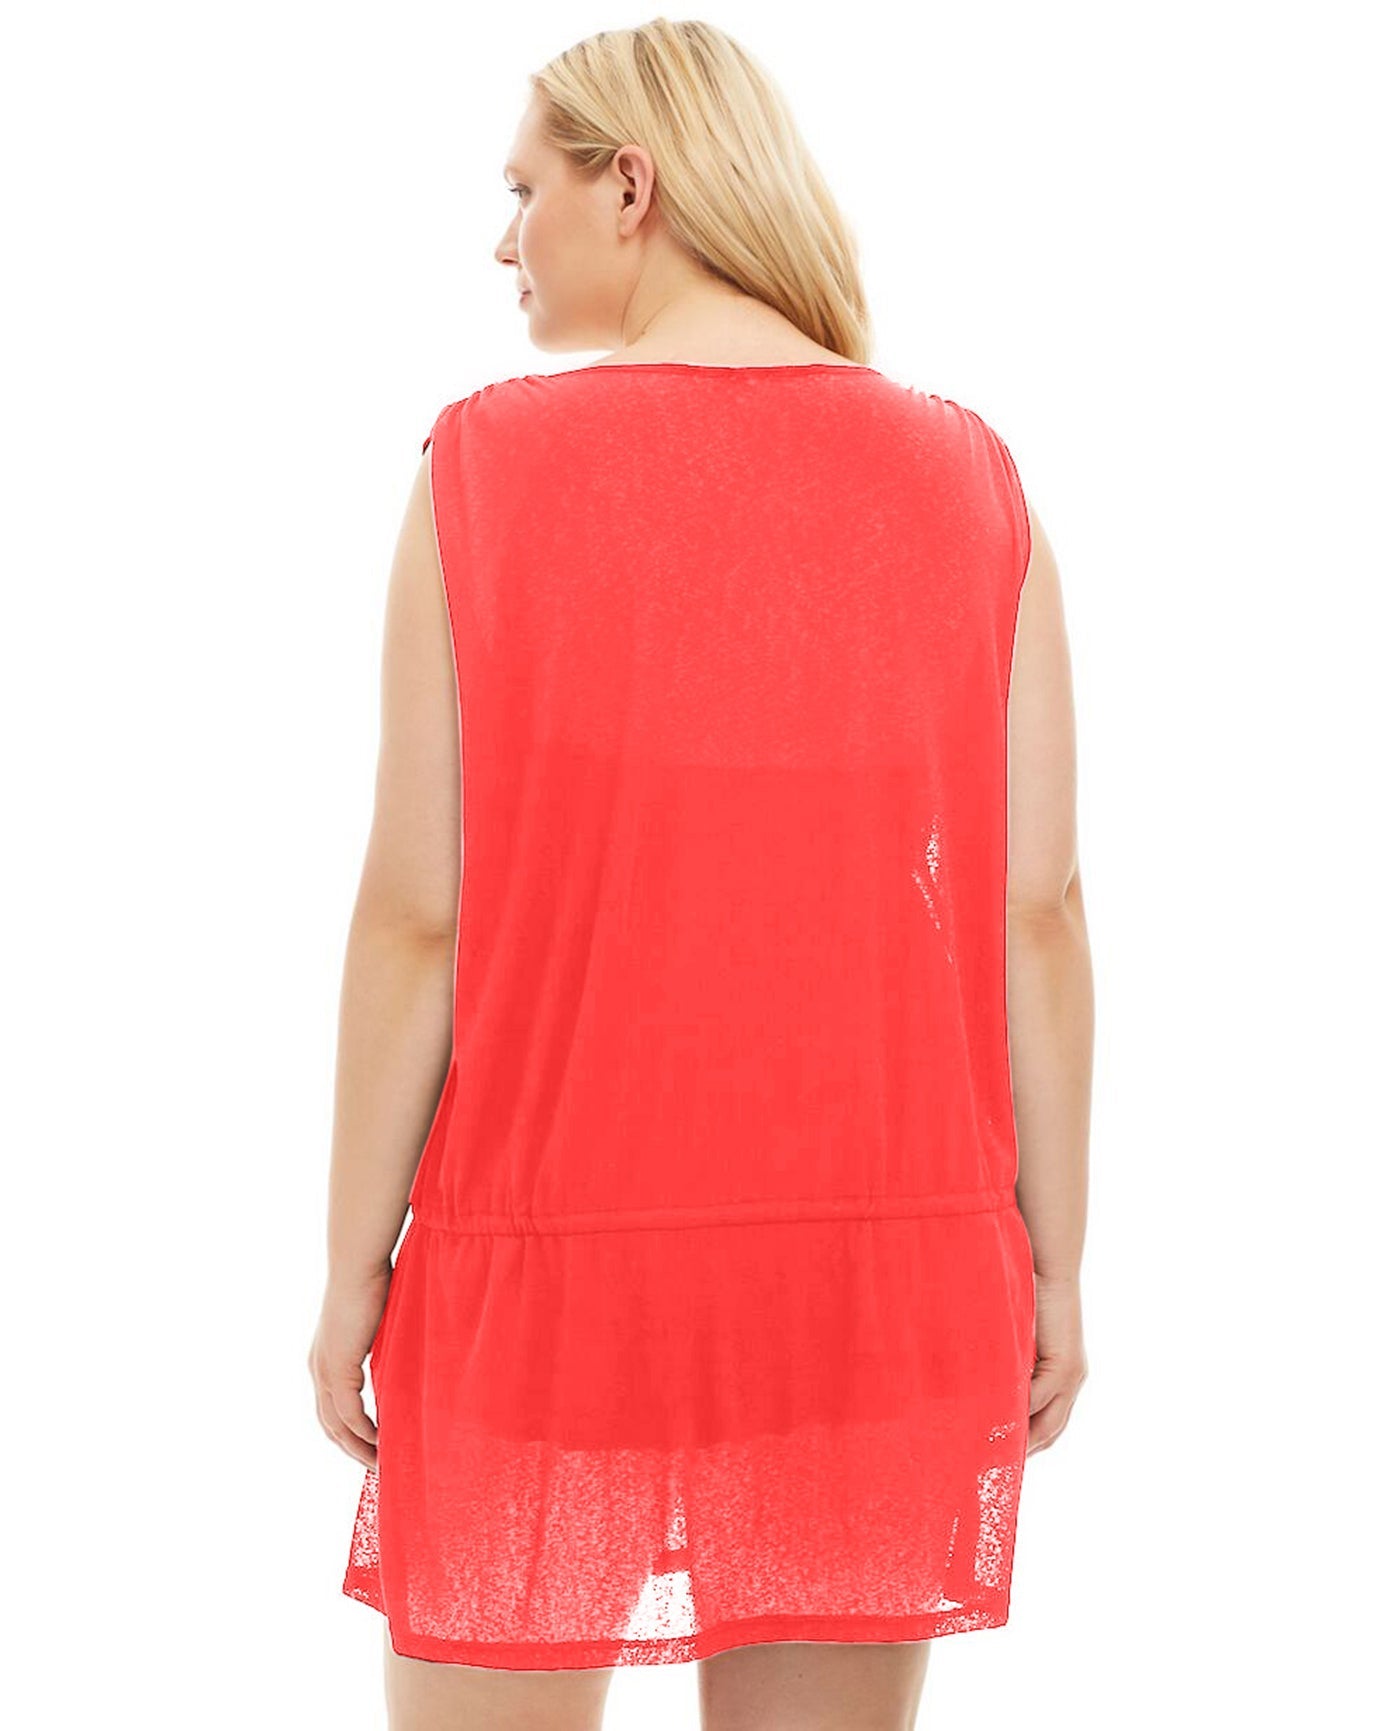 Back View Of Always For Me Plus Size Drawstring Tank Cover Up Dress | AFM CORAL